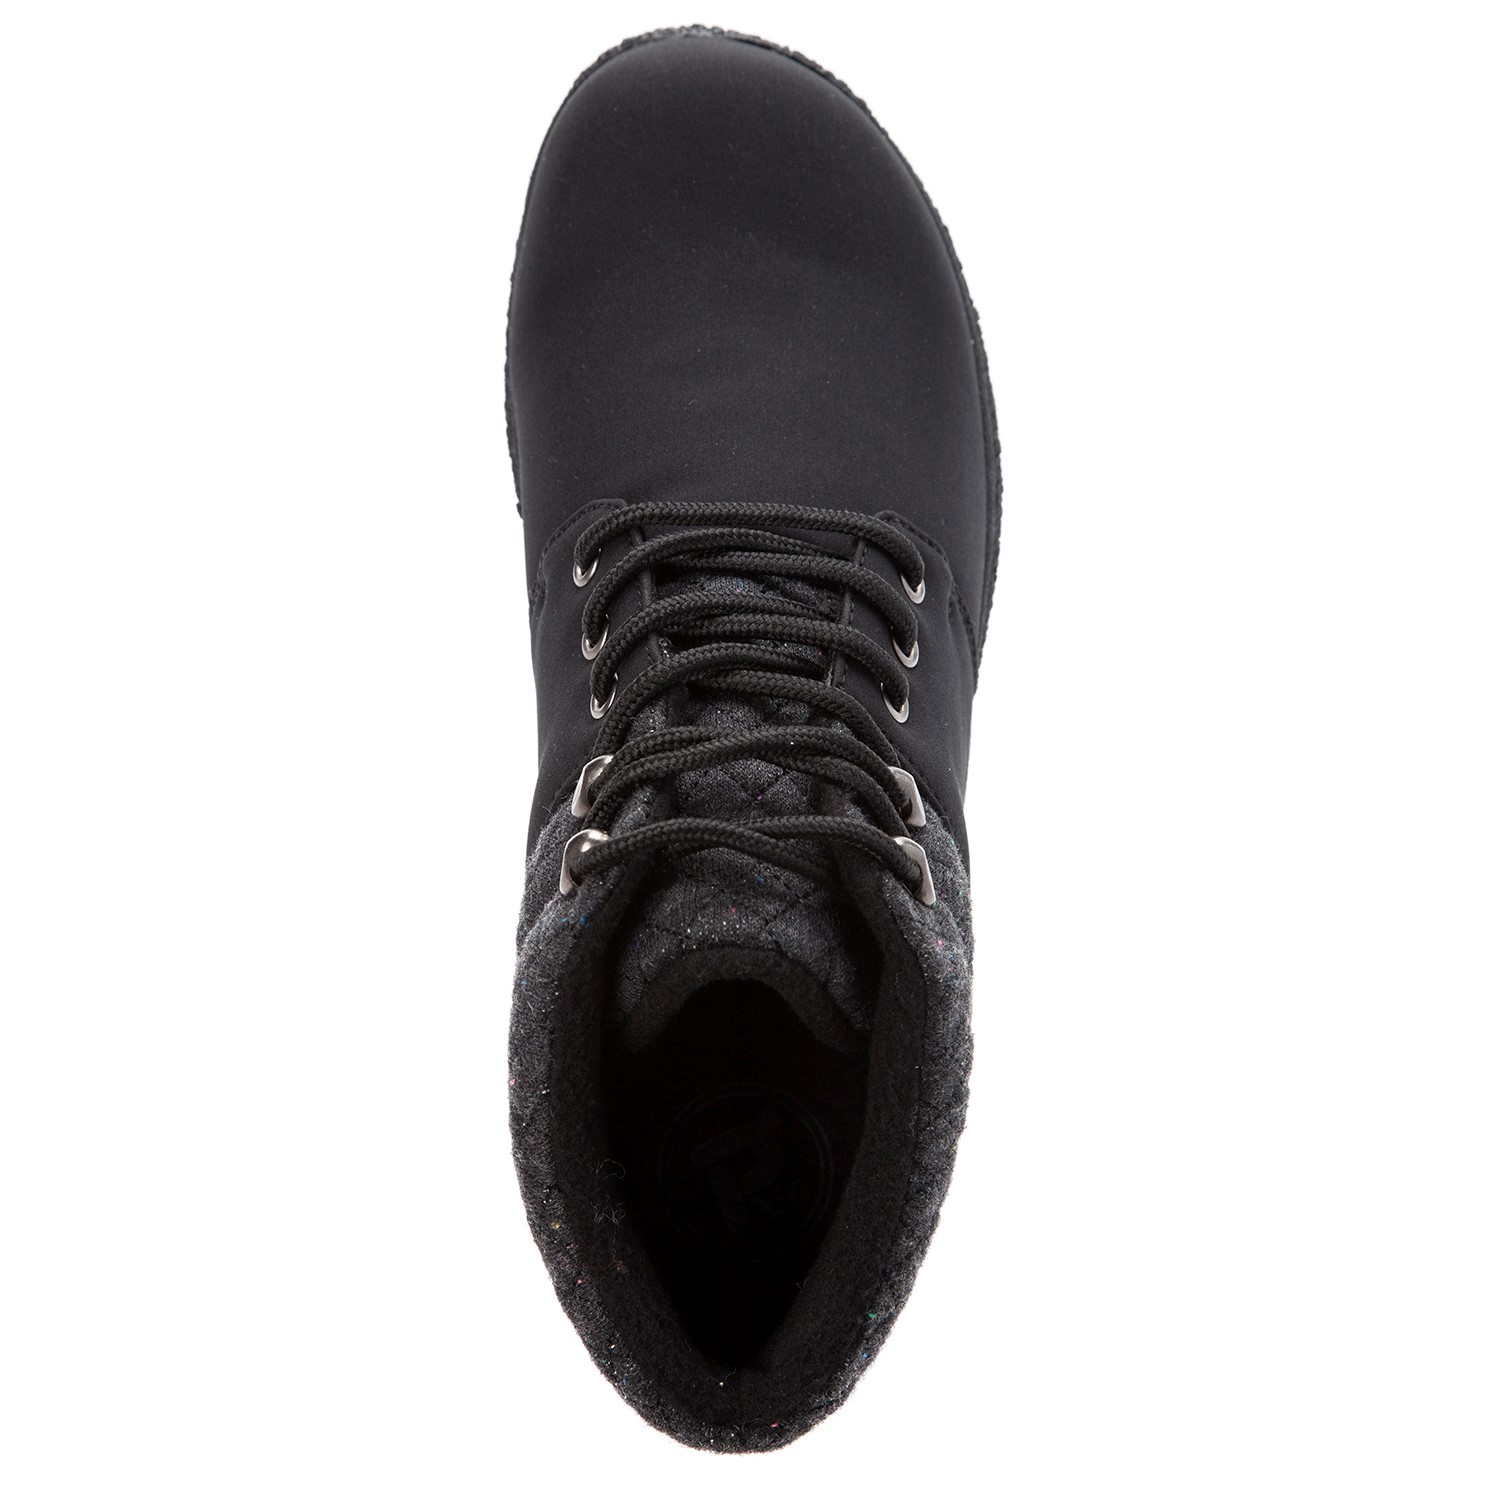 NEW in Black Nylon Details about   PropetMadi Ankle Lace Up Boot Women’s